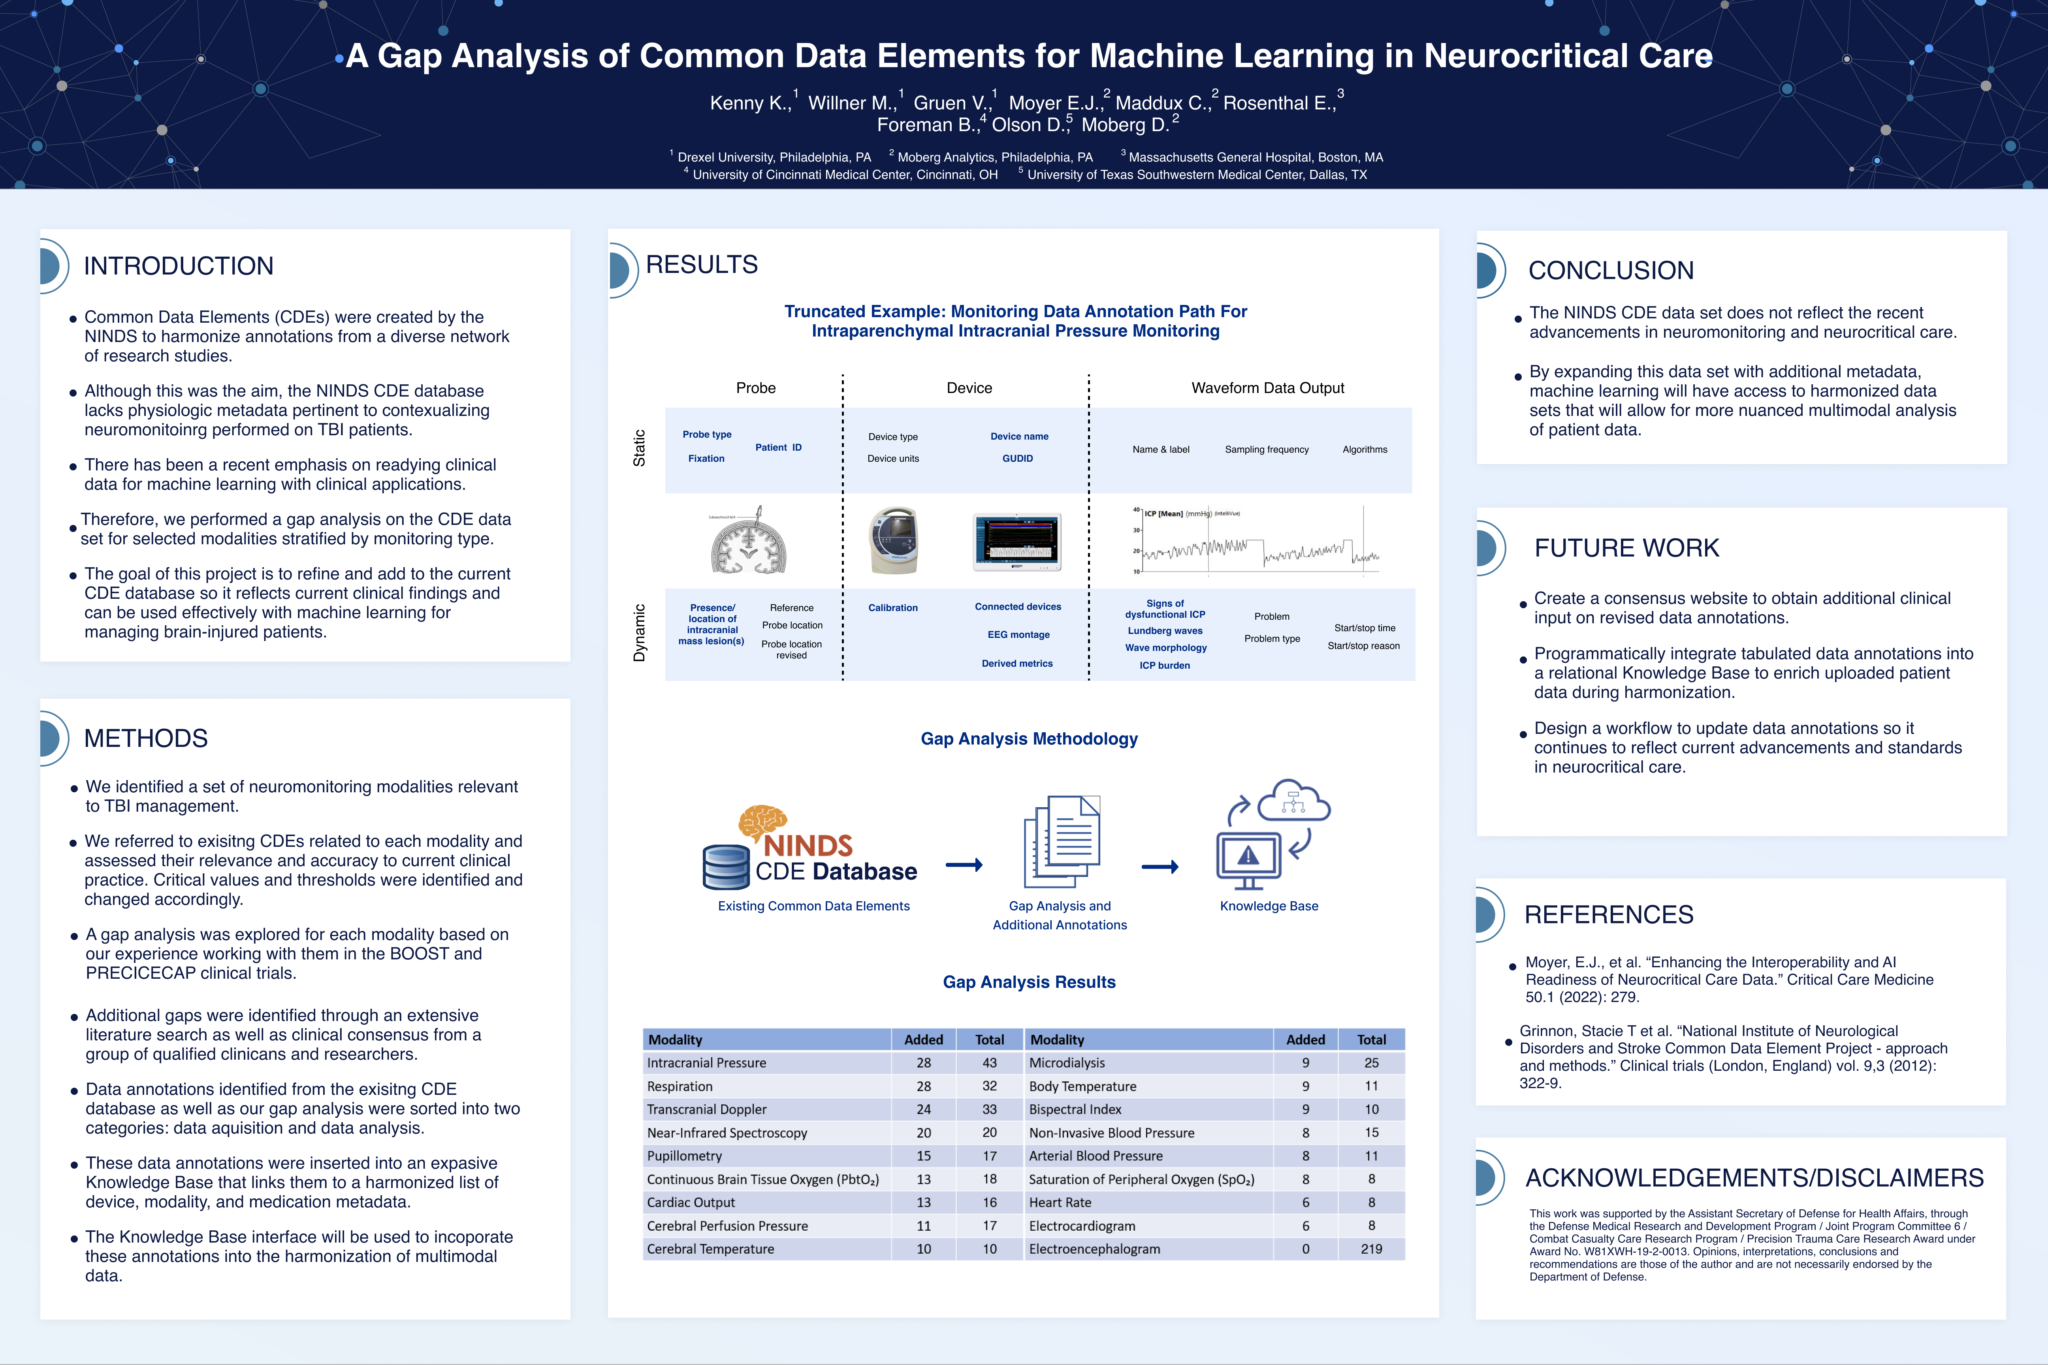 A Gap Analysis of Common Data Element for Machine Learning in Neurocritical Care